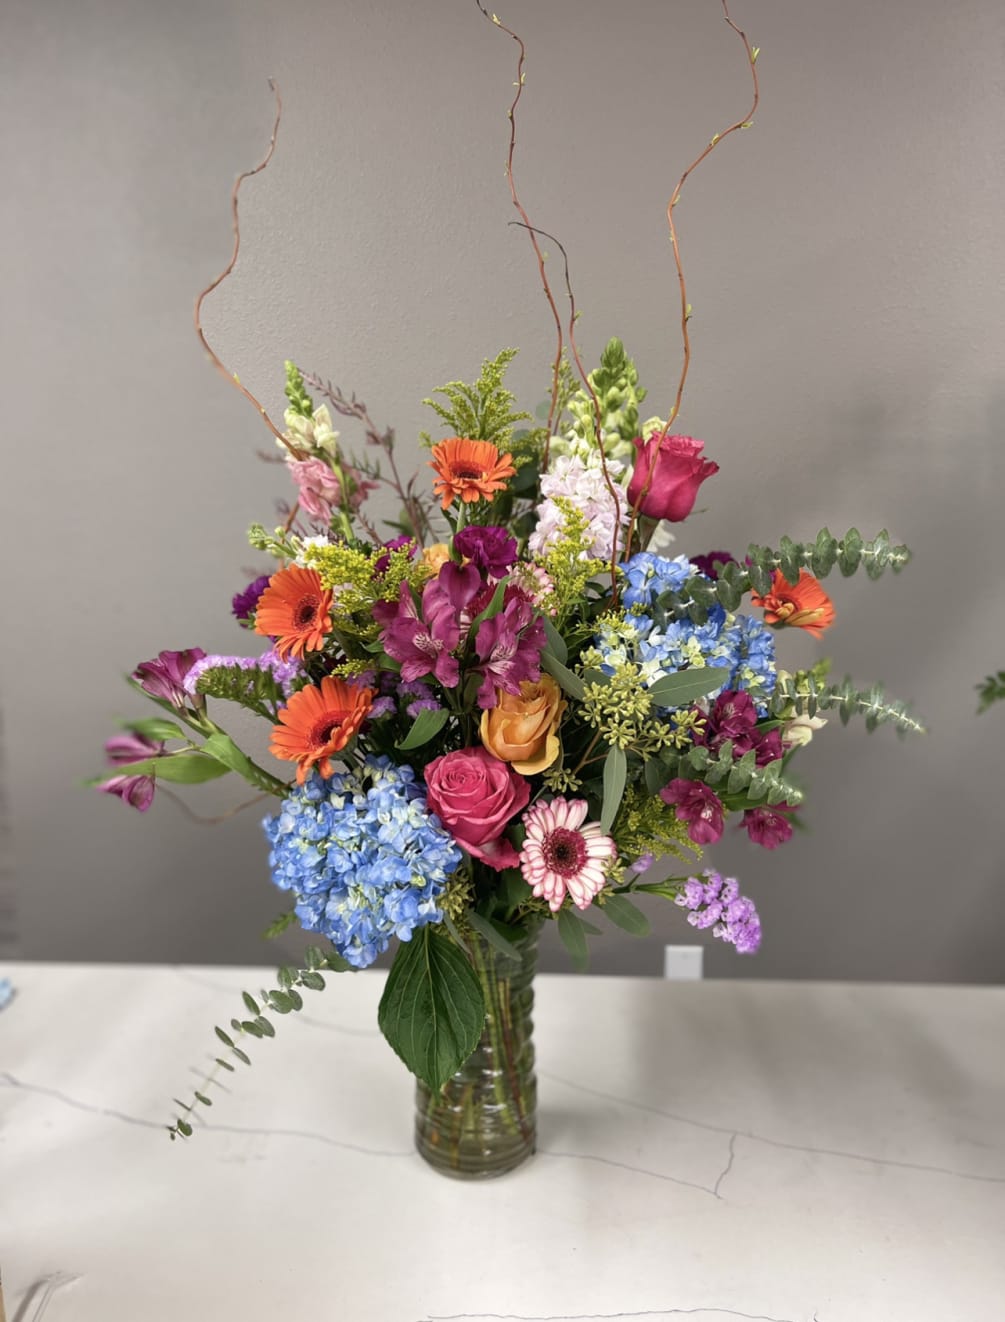 MAKE THEIR DAY WITH THIS BRIGHT AND VIBRANT COLLECTION OF FLOWERS BEAUTIFULLY